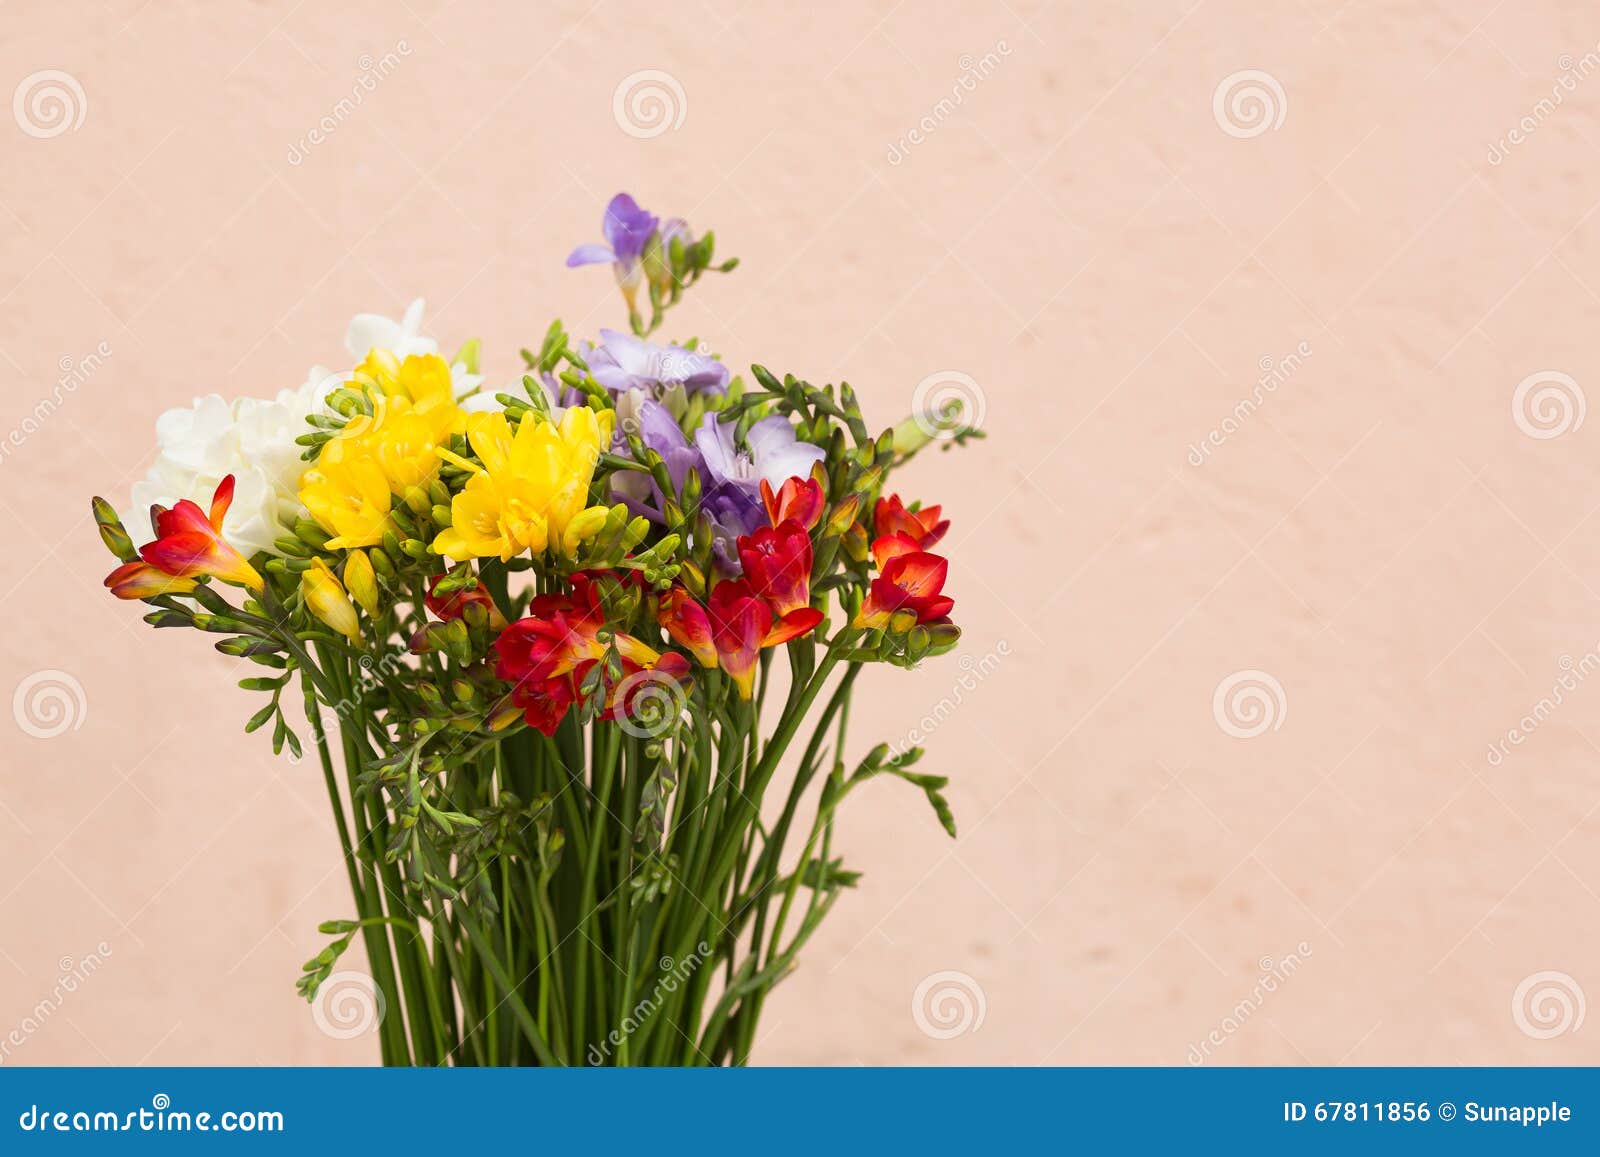 Yellow and Red Daffodils Background Stock Photo - Image of beautiful ...